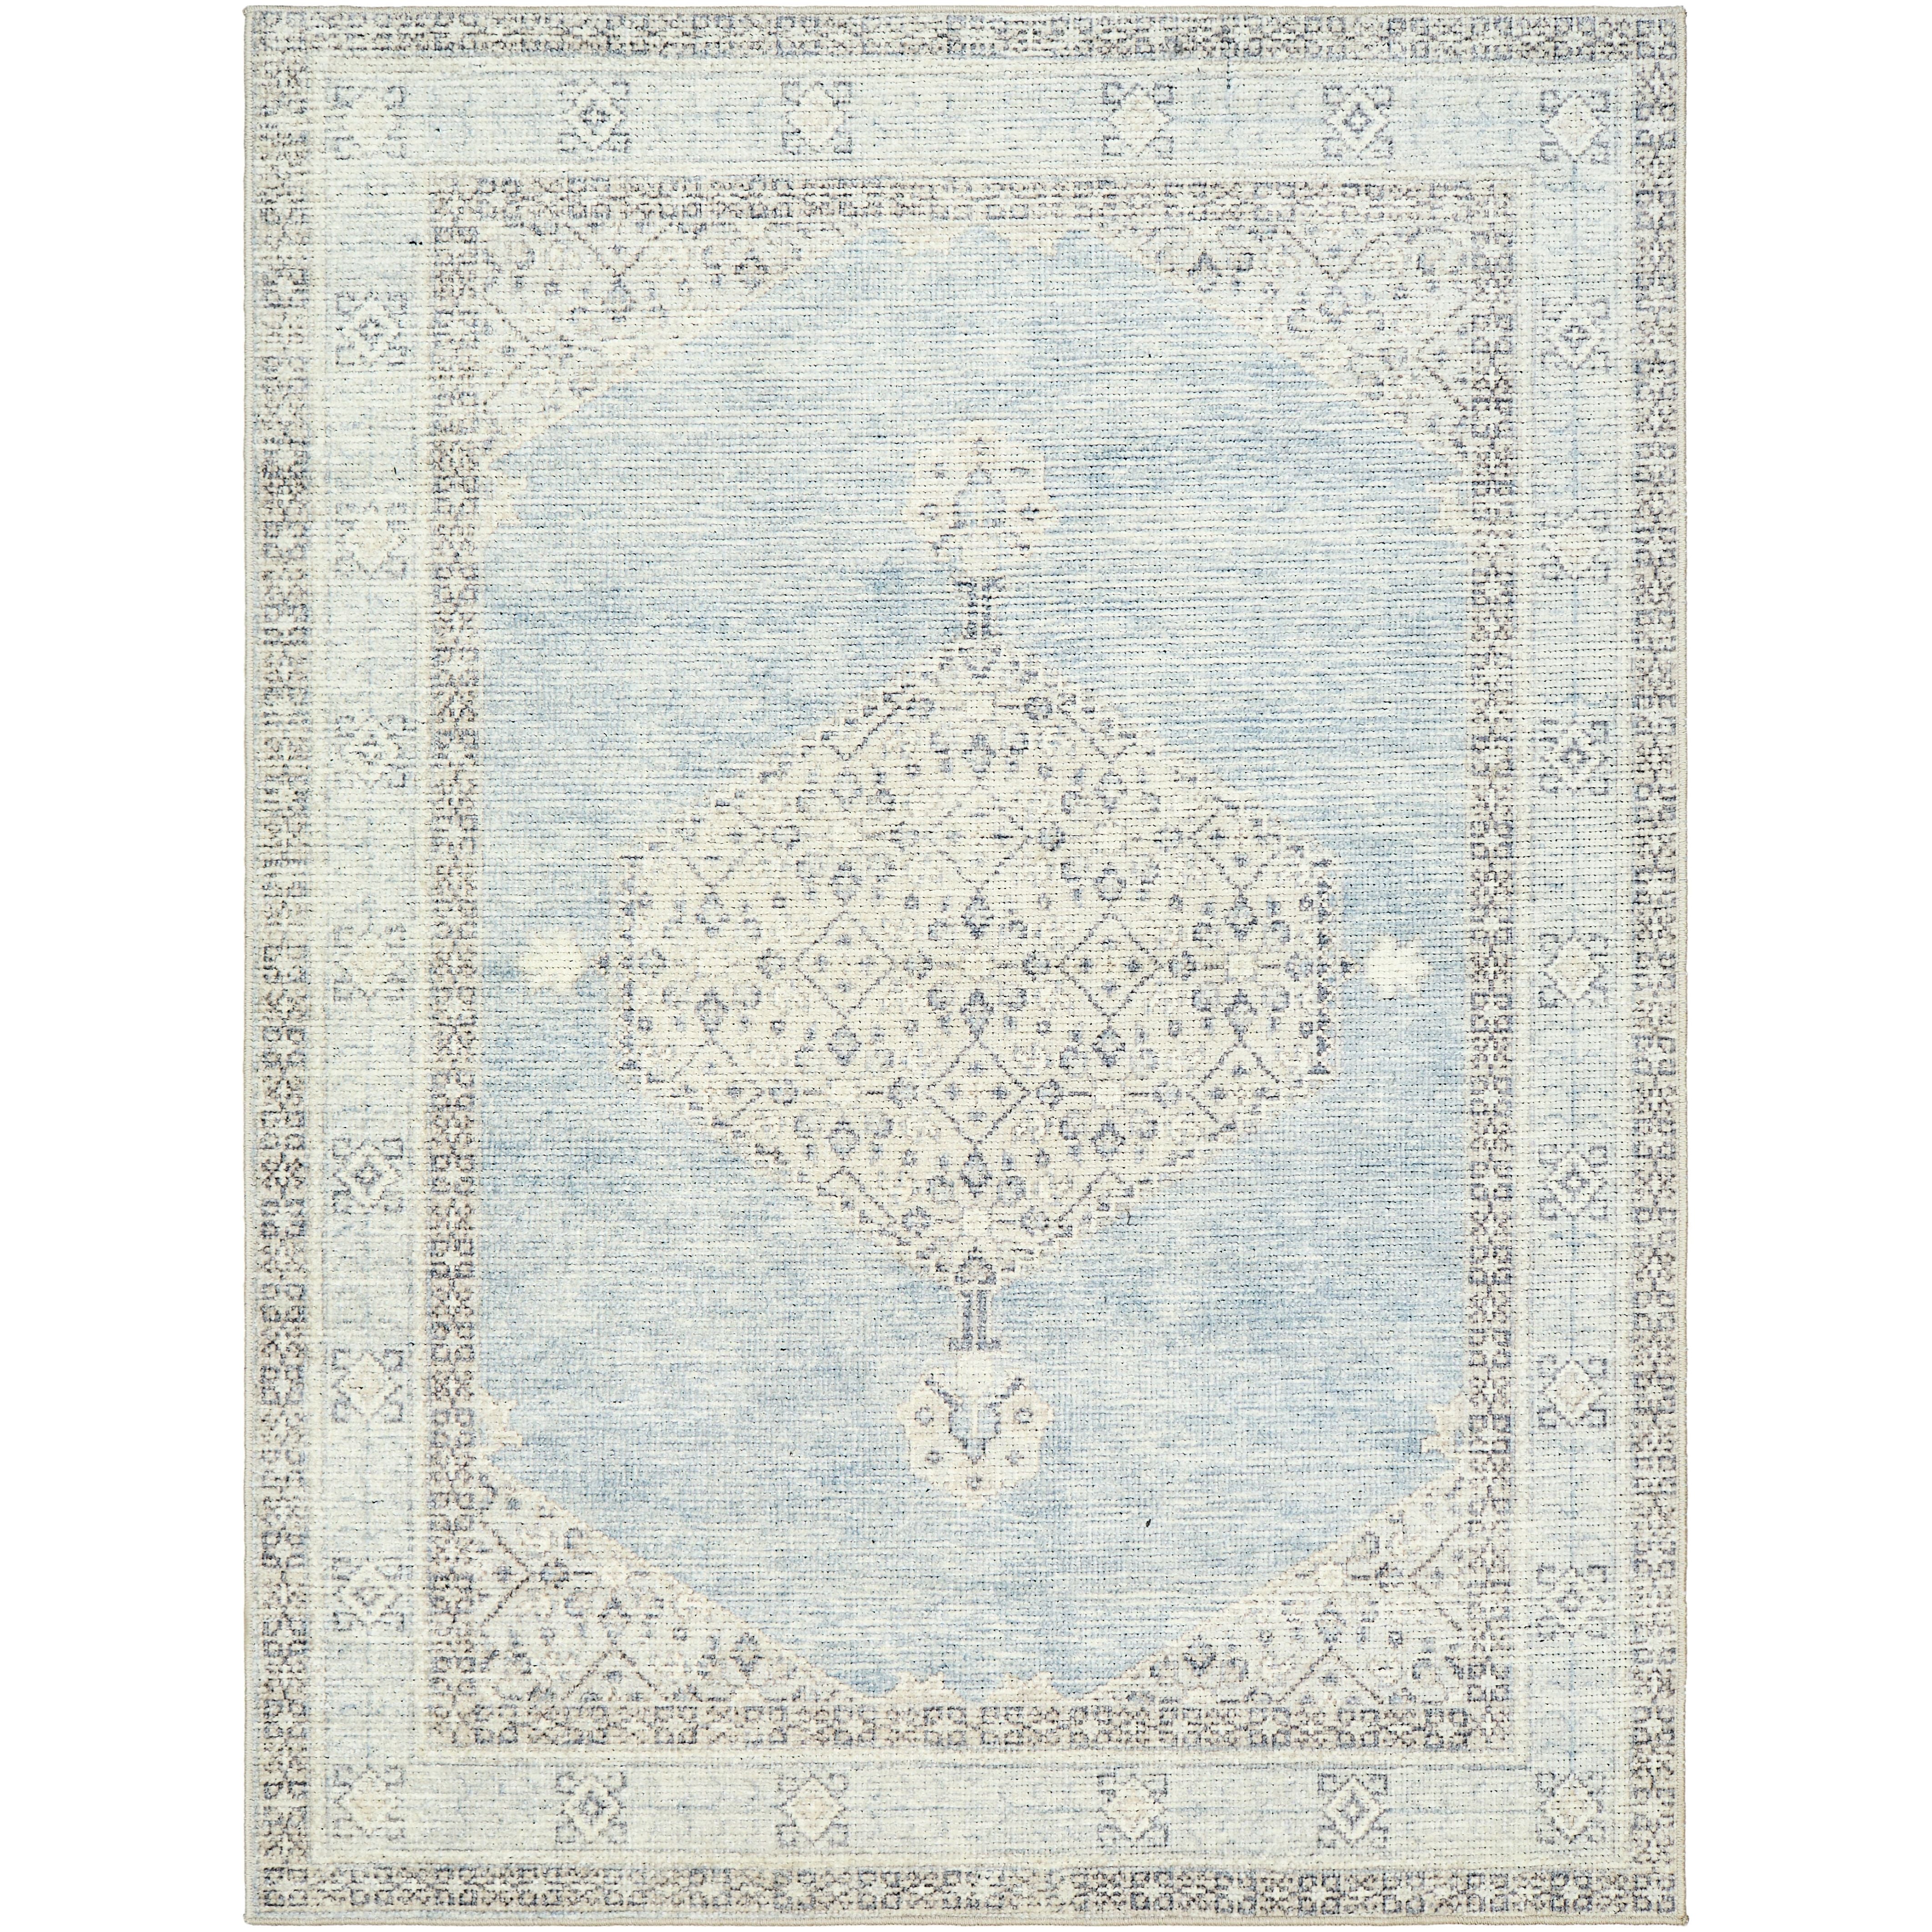 Brought to you by Becki Owens x Surya, the Lila Denim medallion area rug combines rich, detailed design with warm soft neutrals and tones to create an inviting space that will always feel familiar. Amethyst Home provides interior design, new construction, custom furniture, and area rugs in the New York metro area.